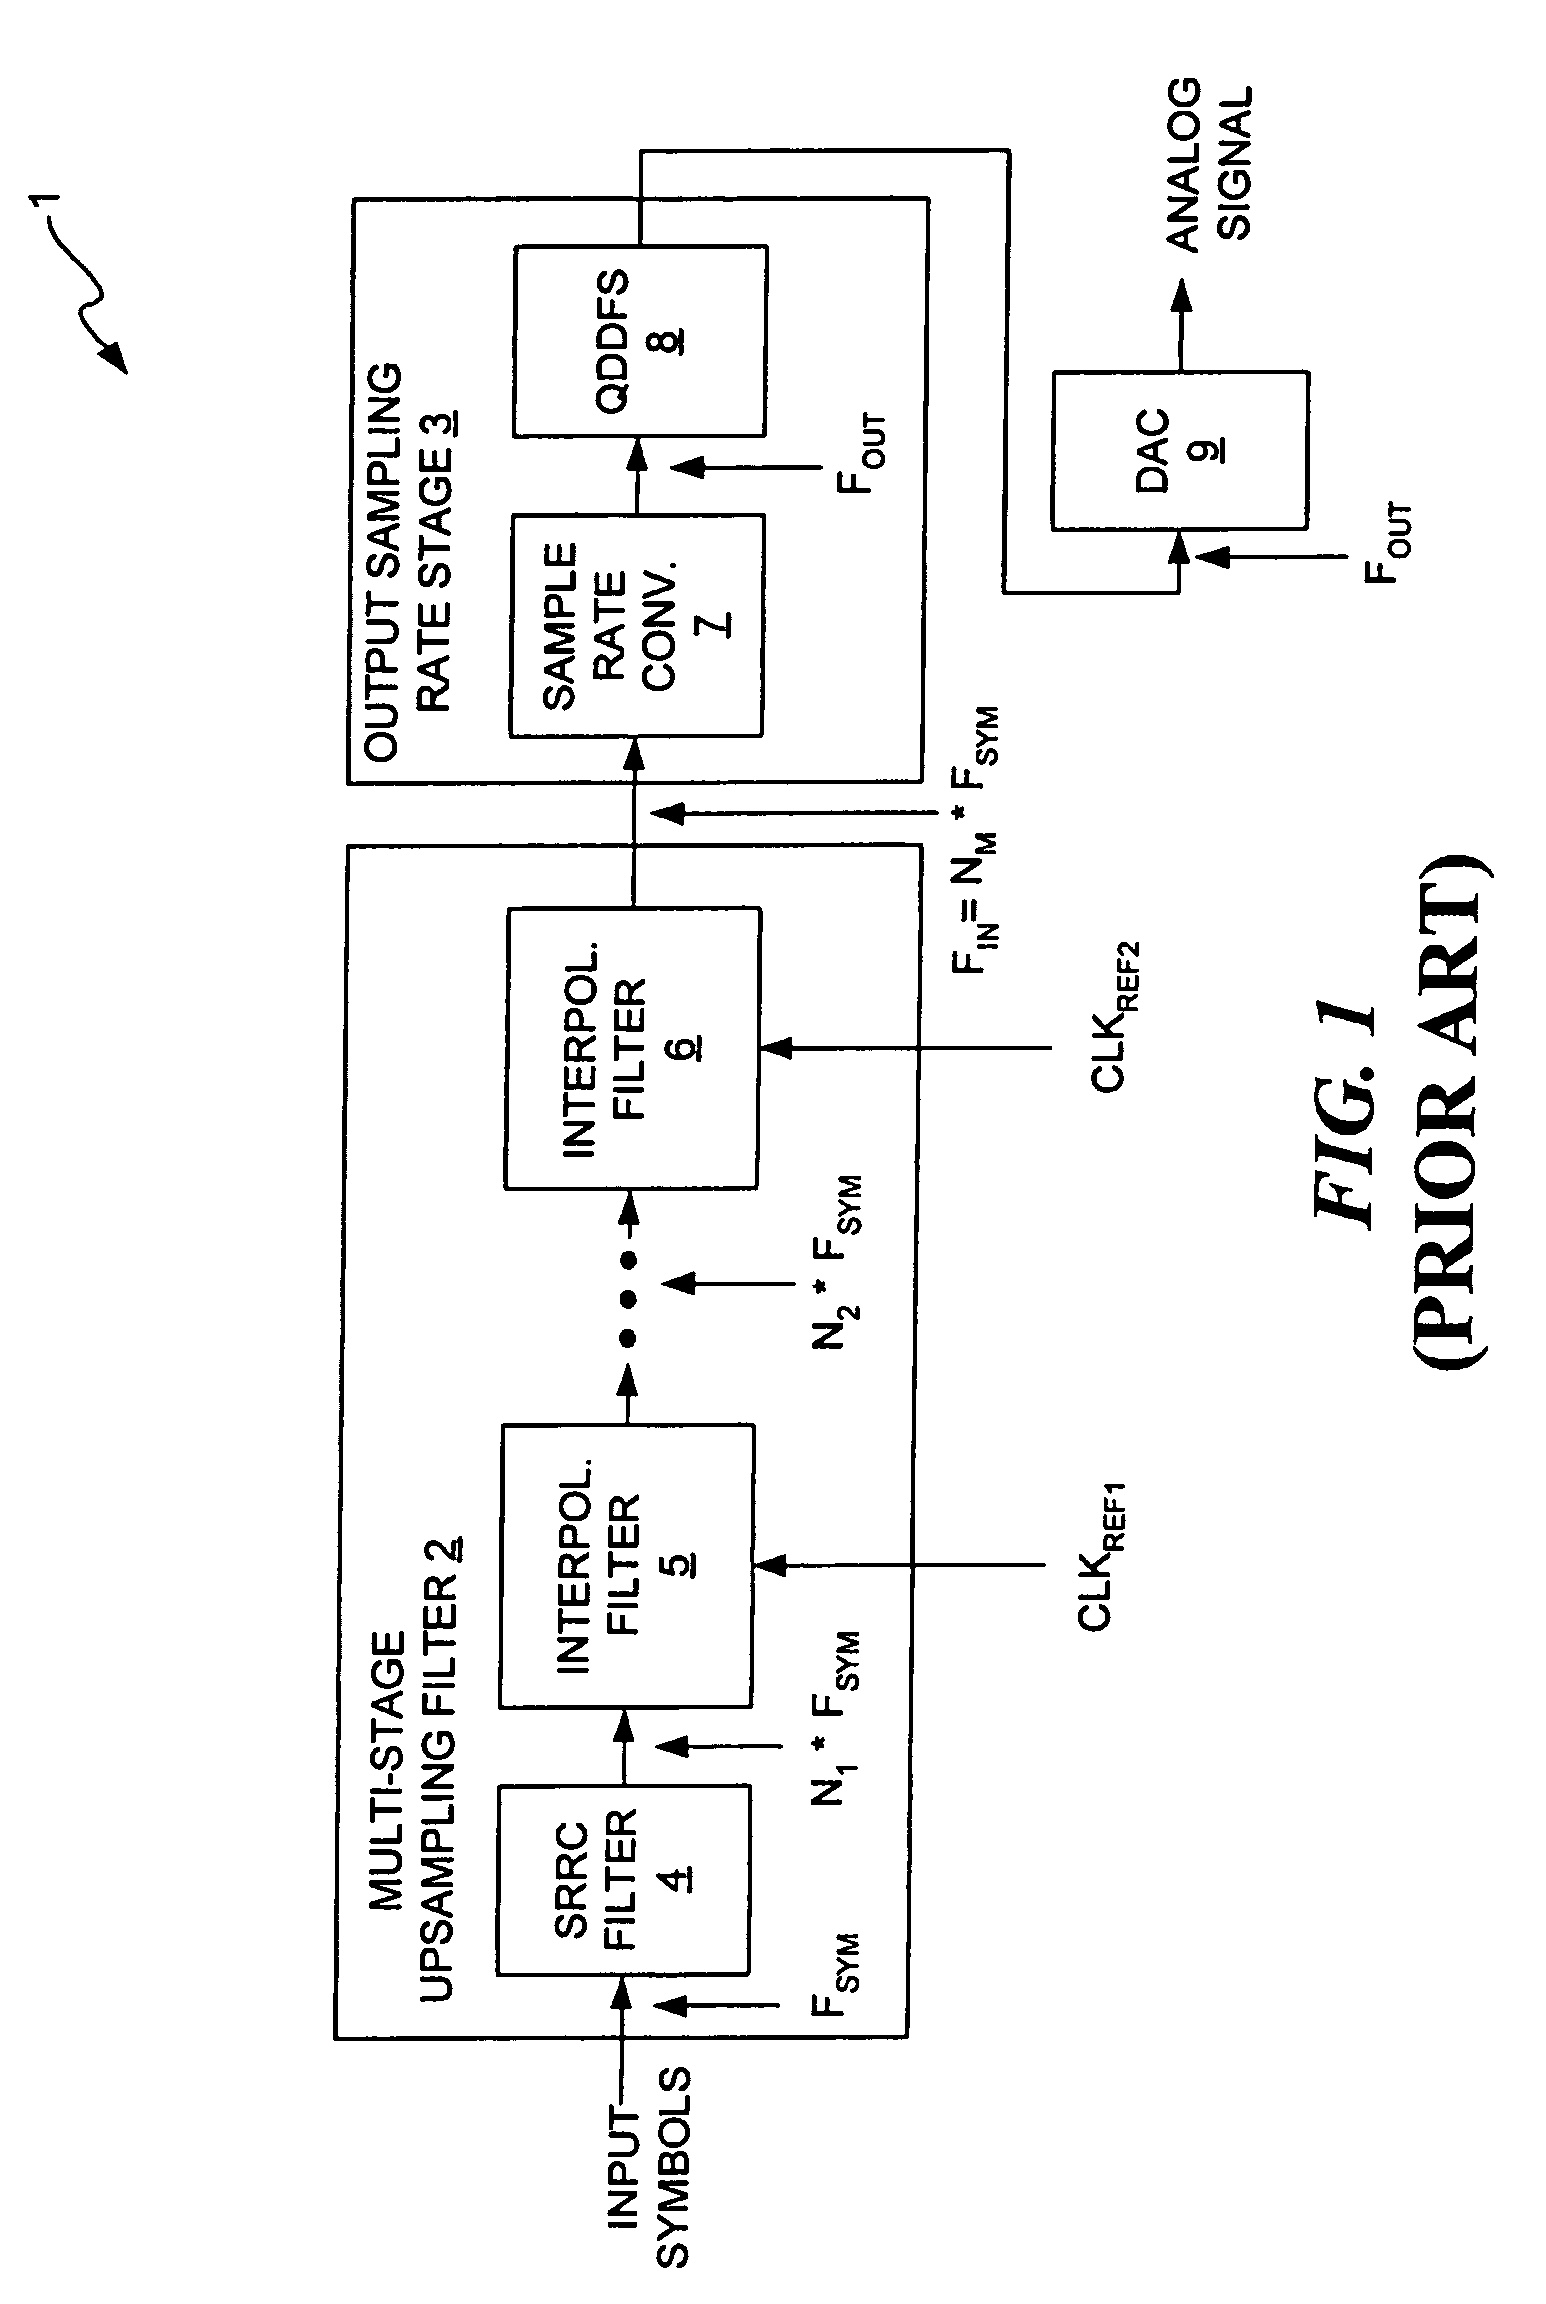 Method and apparatus for performing sample rate conversion